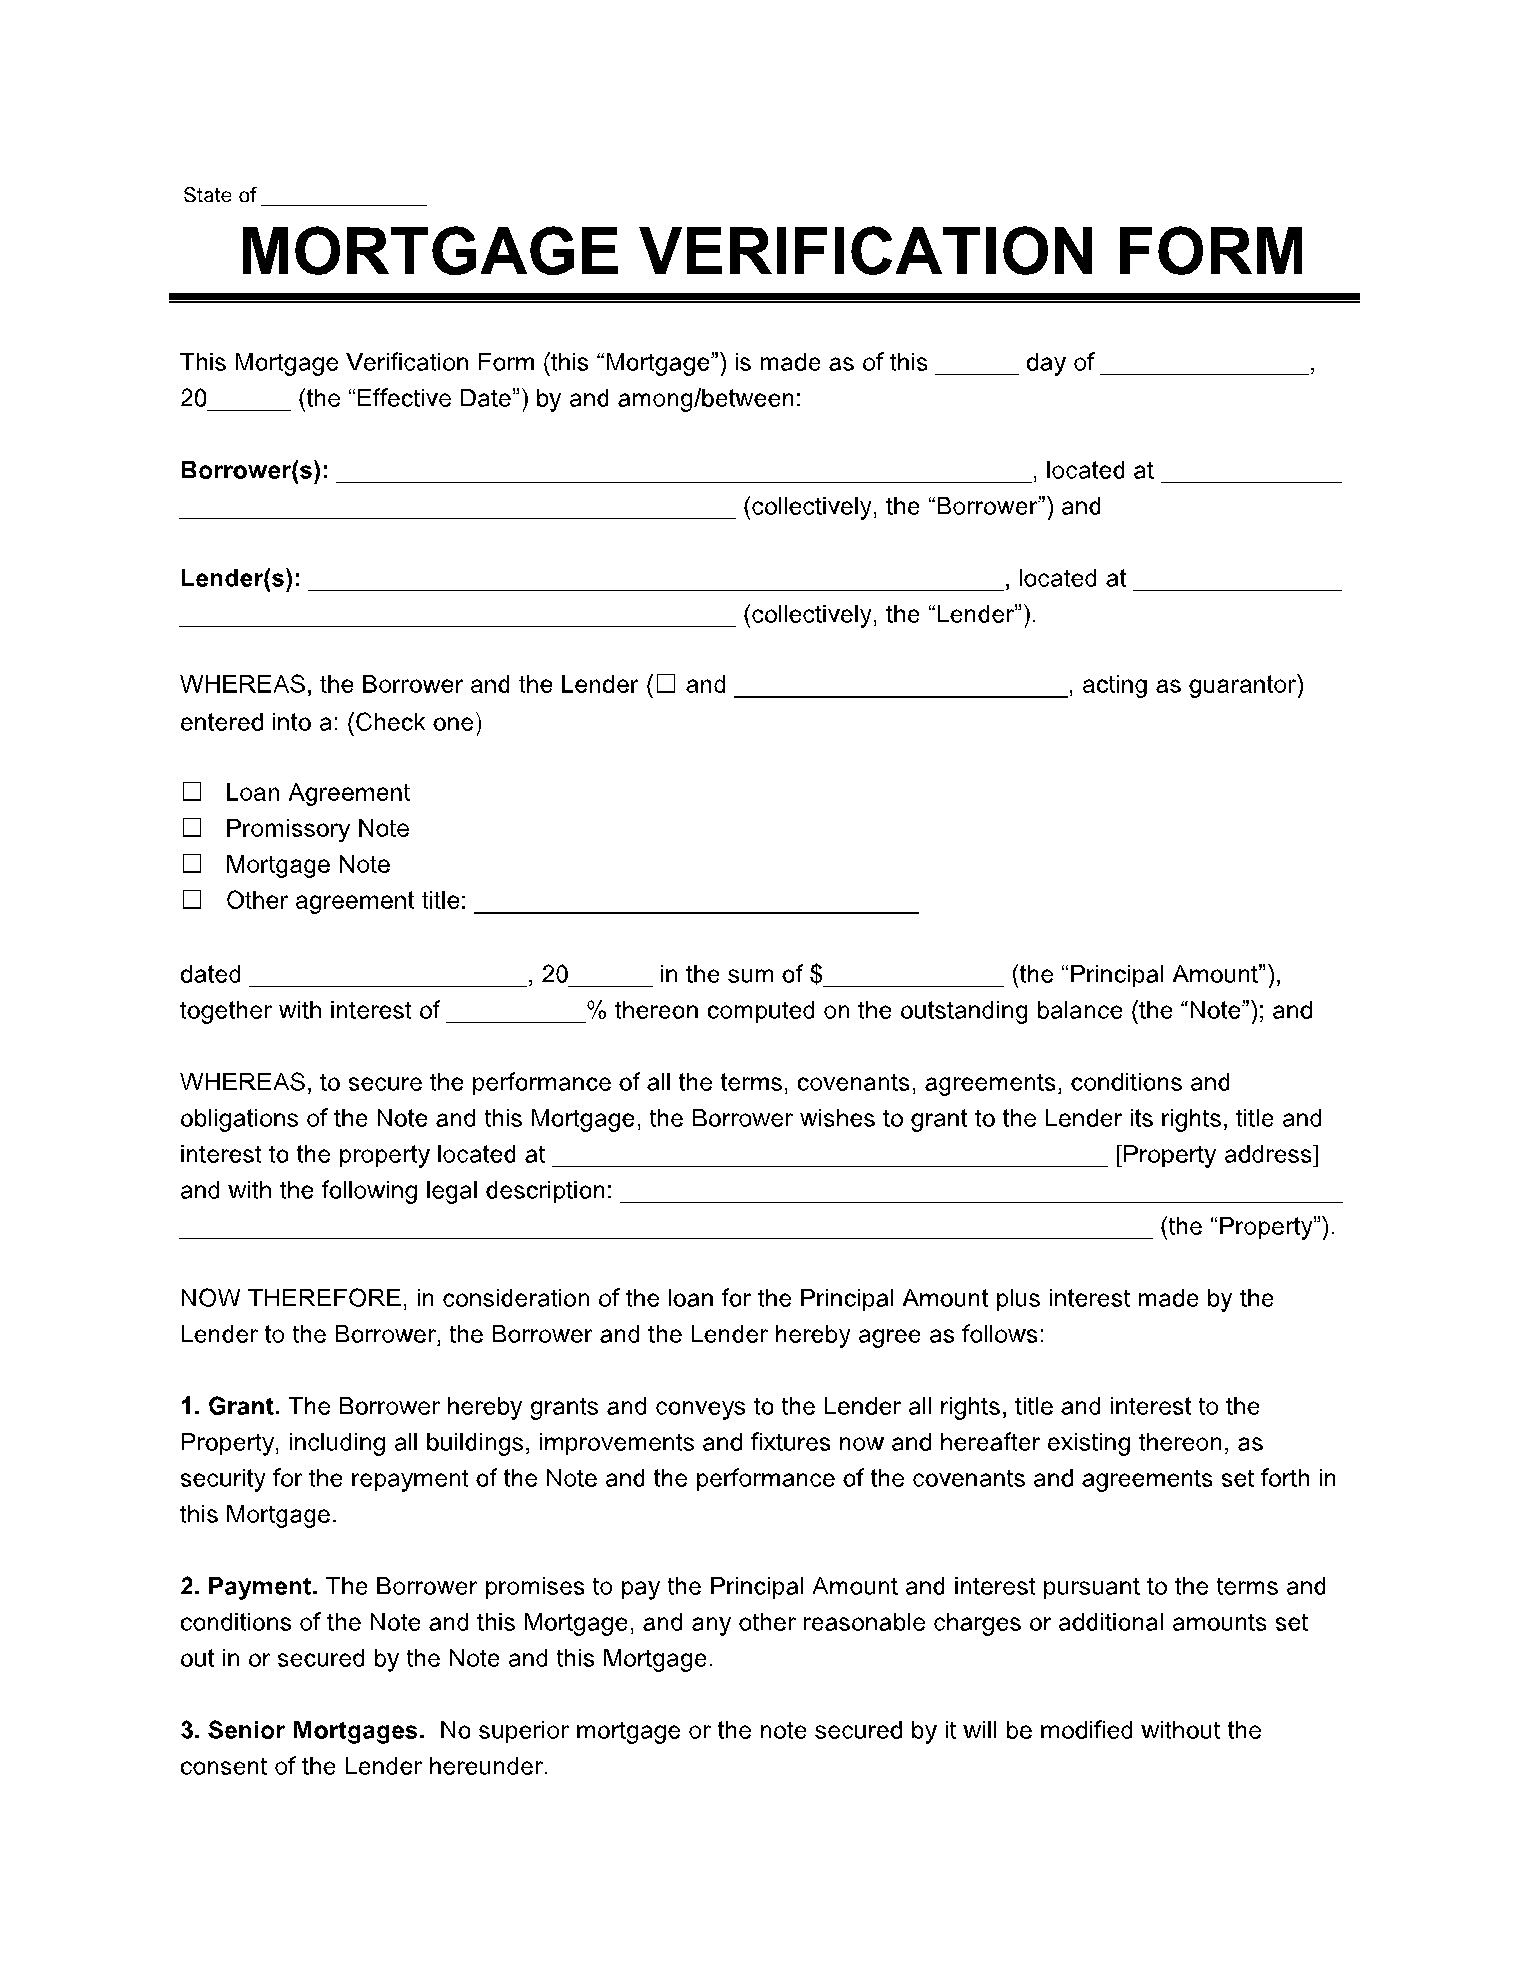 Verification of Mortgage Form